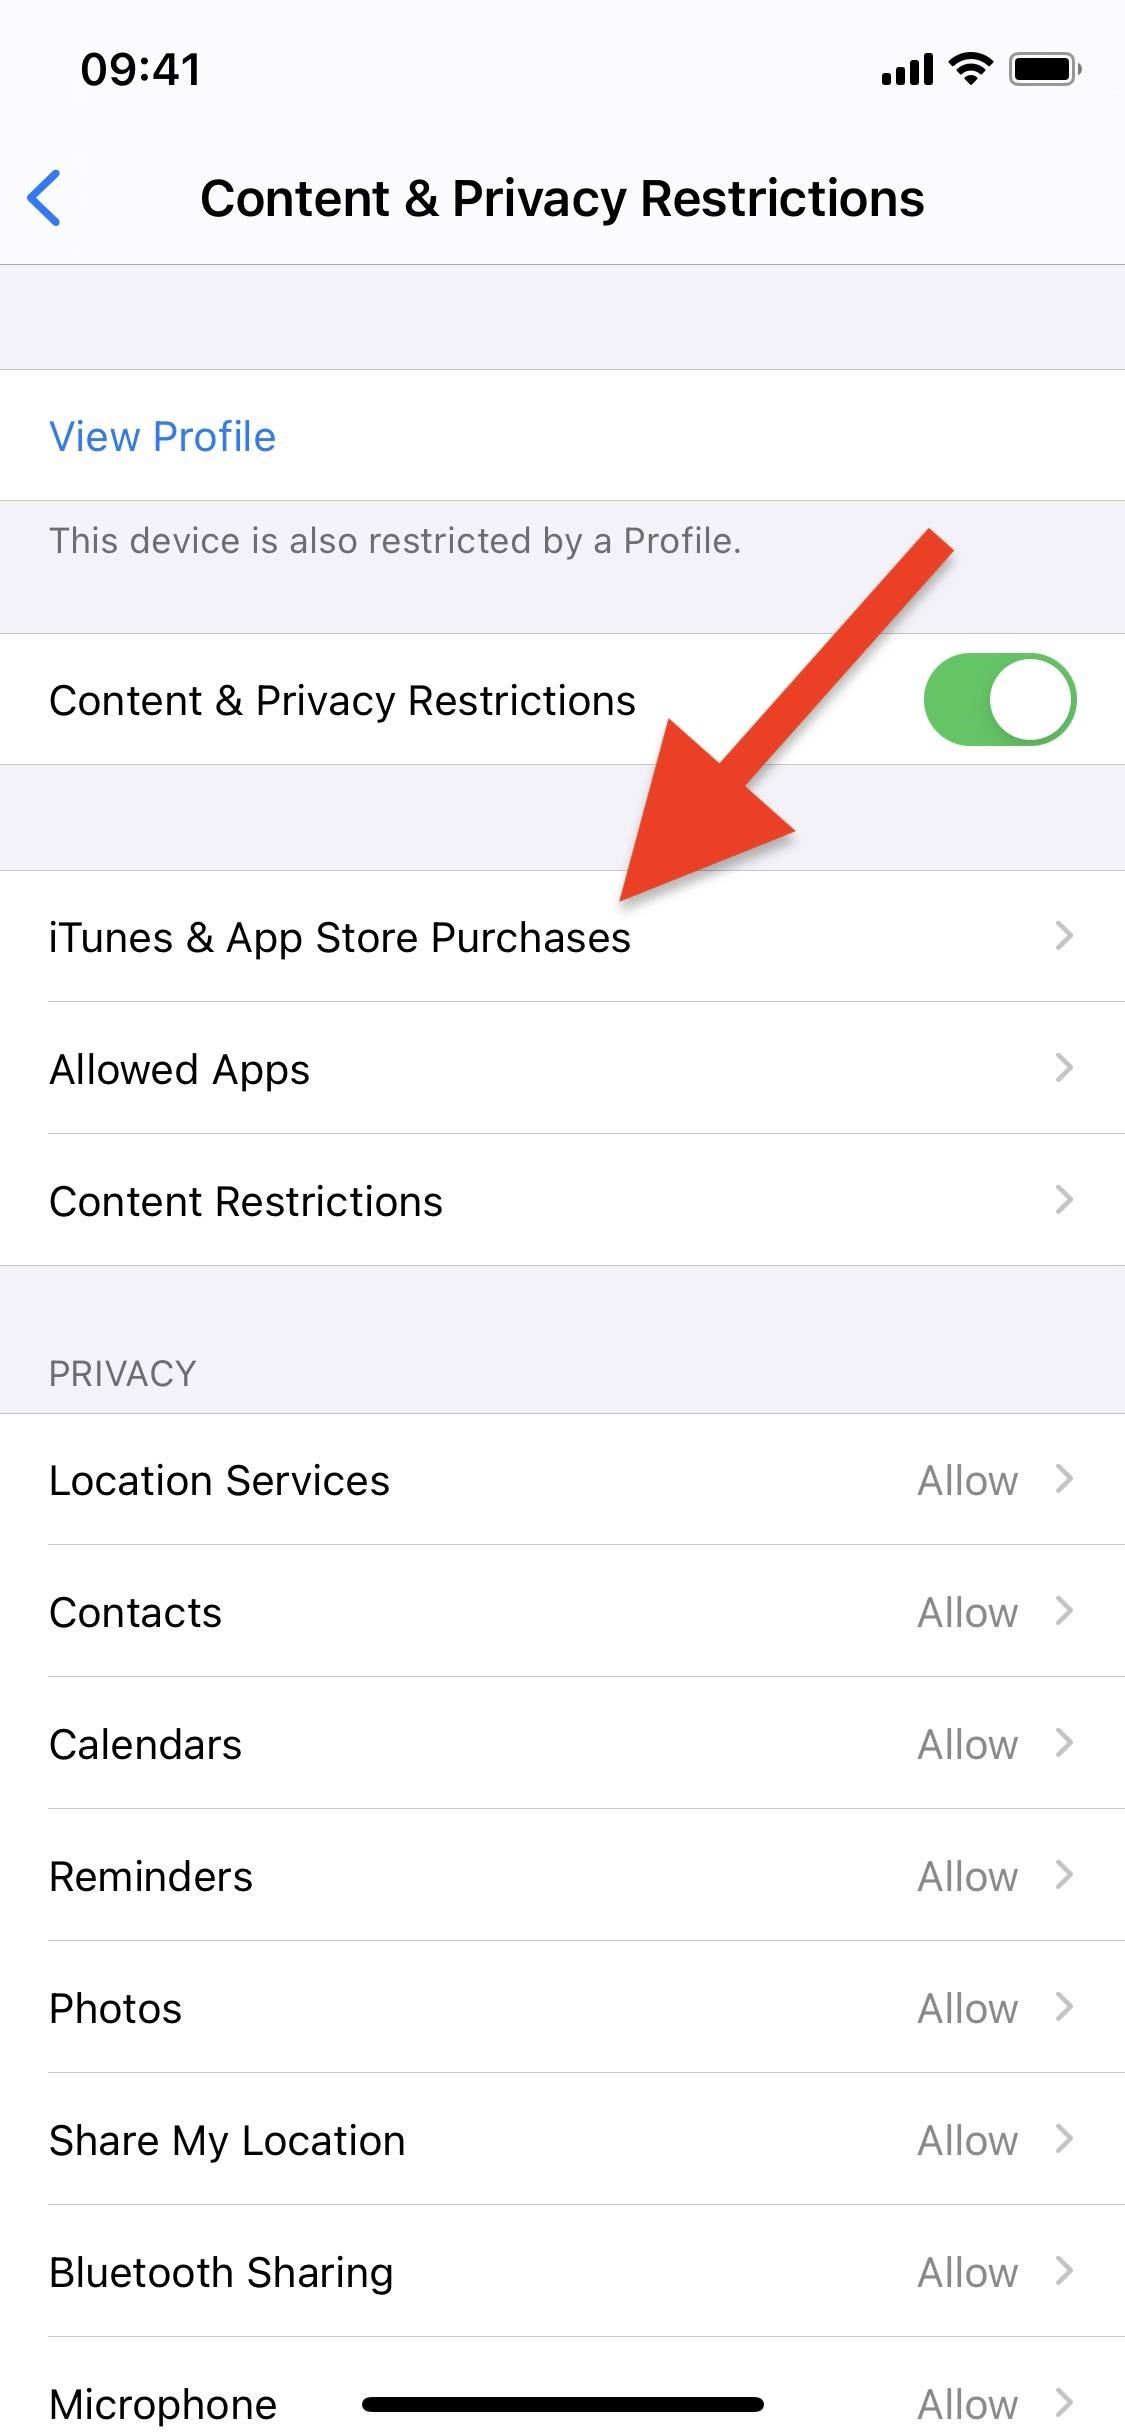 If Your Sneaky Kids Keep Making In-App Purchases on Your iPhone, This Will Block Them for Good